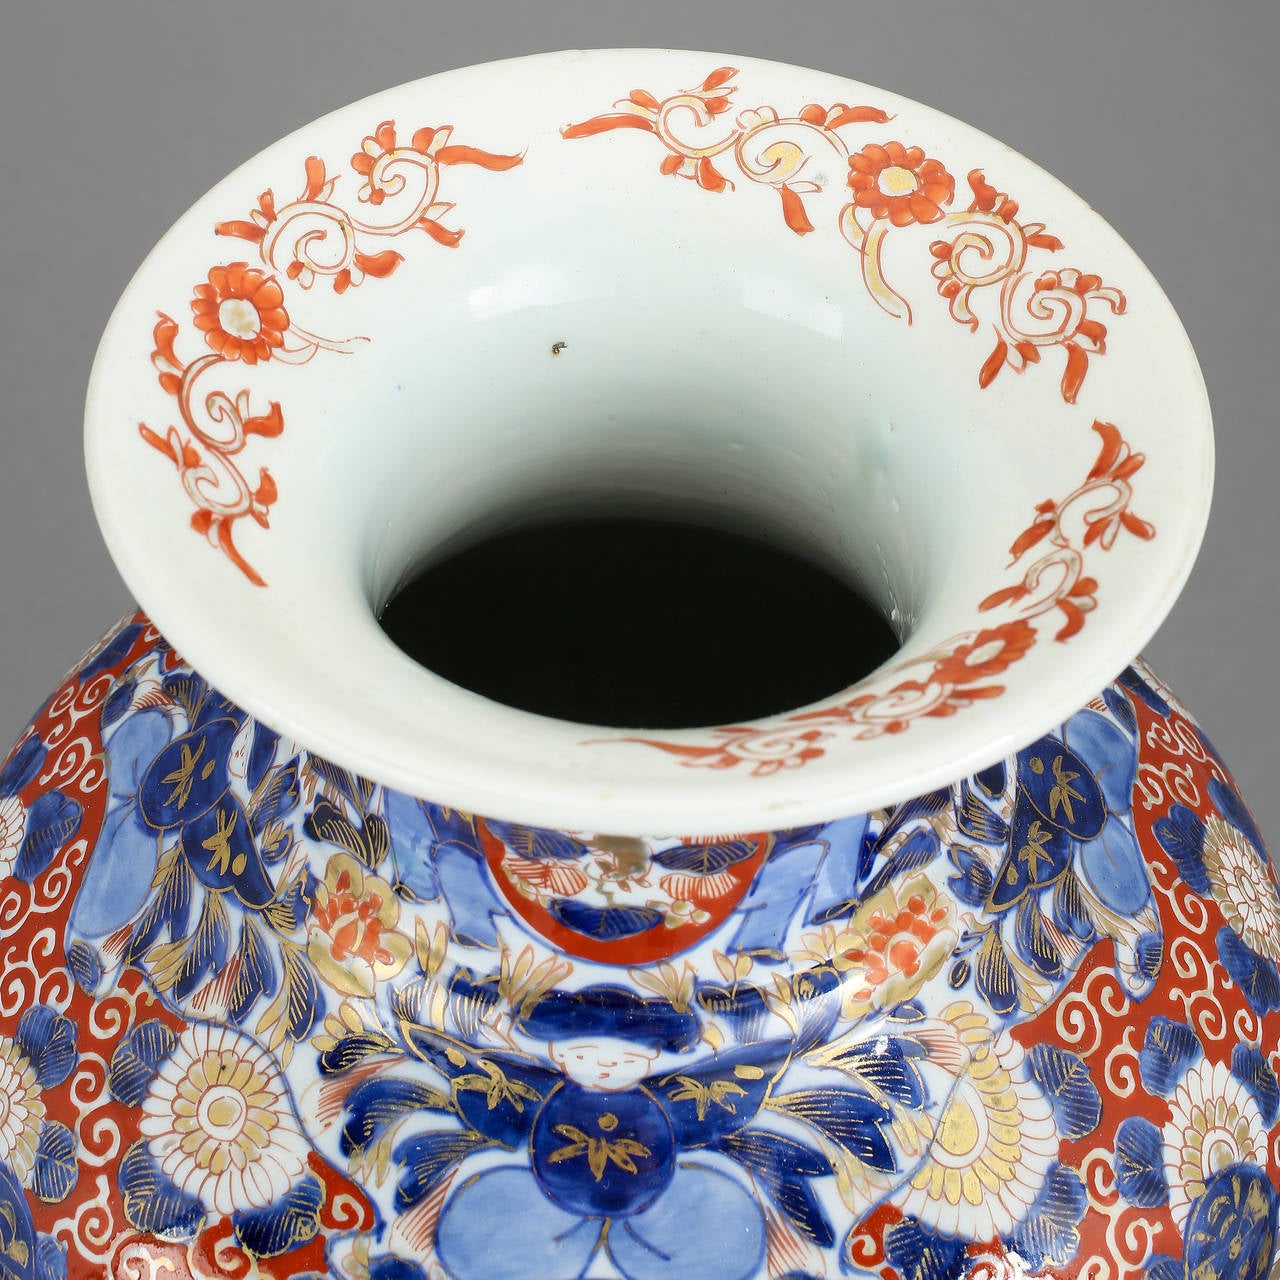 A fine late 19th century Chinese Imari vase of good scale, the surface profusely decorated with red, blue and gilt on a white ground. 

Following the remarkable success of Imari wares in japan in the seventeenth and eighteenth centuries, the